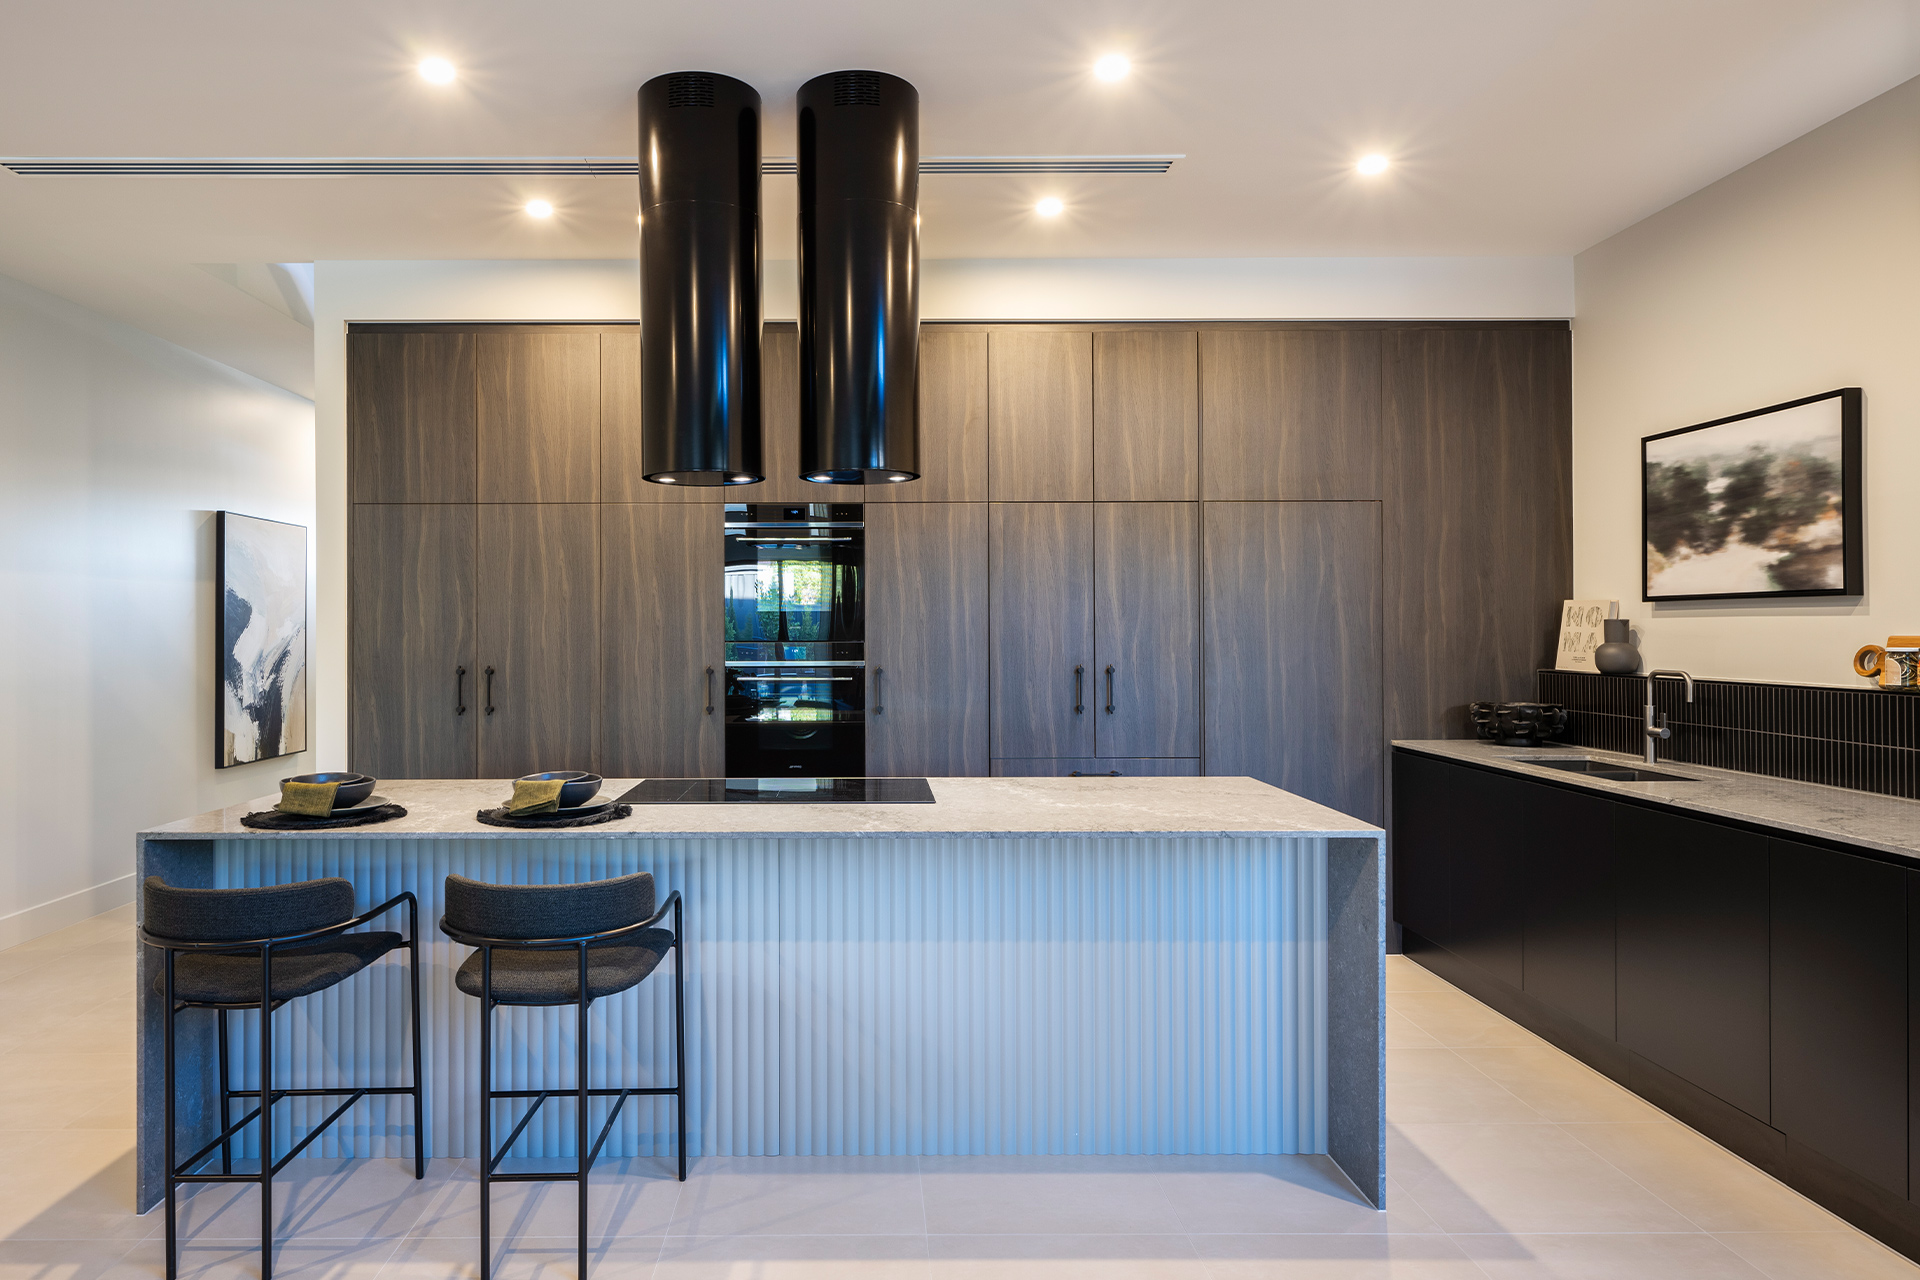 Kitchen with two feature black round exhaust tubes above the island bench